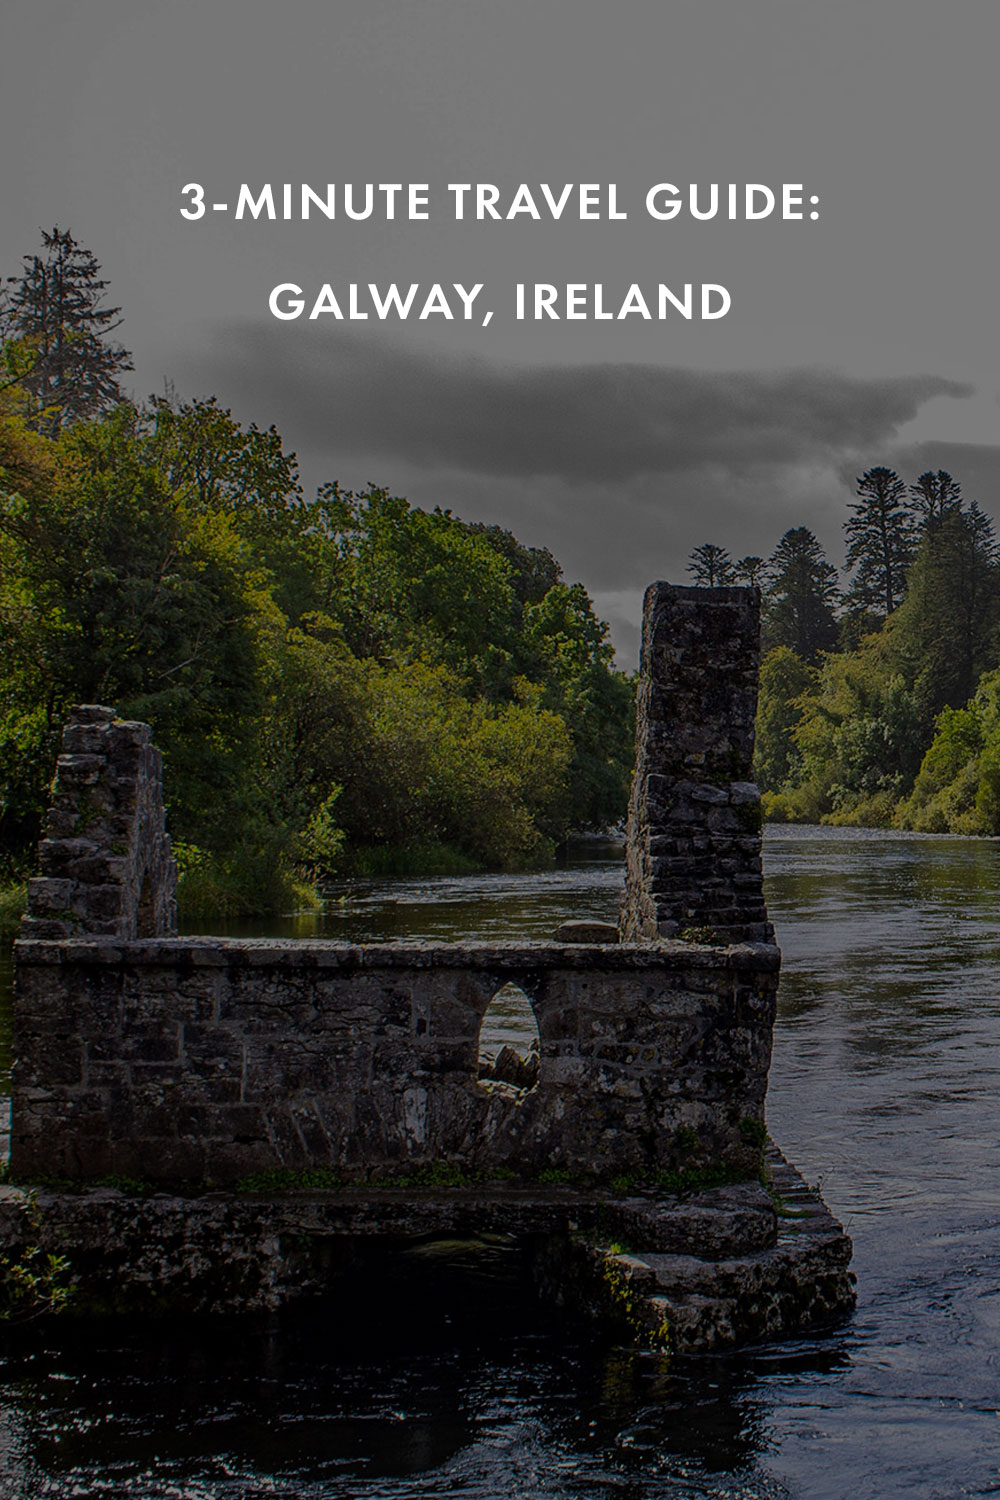 River and old ruins in Killarney National Park in the south west of Ireland.